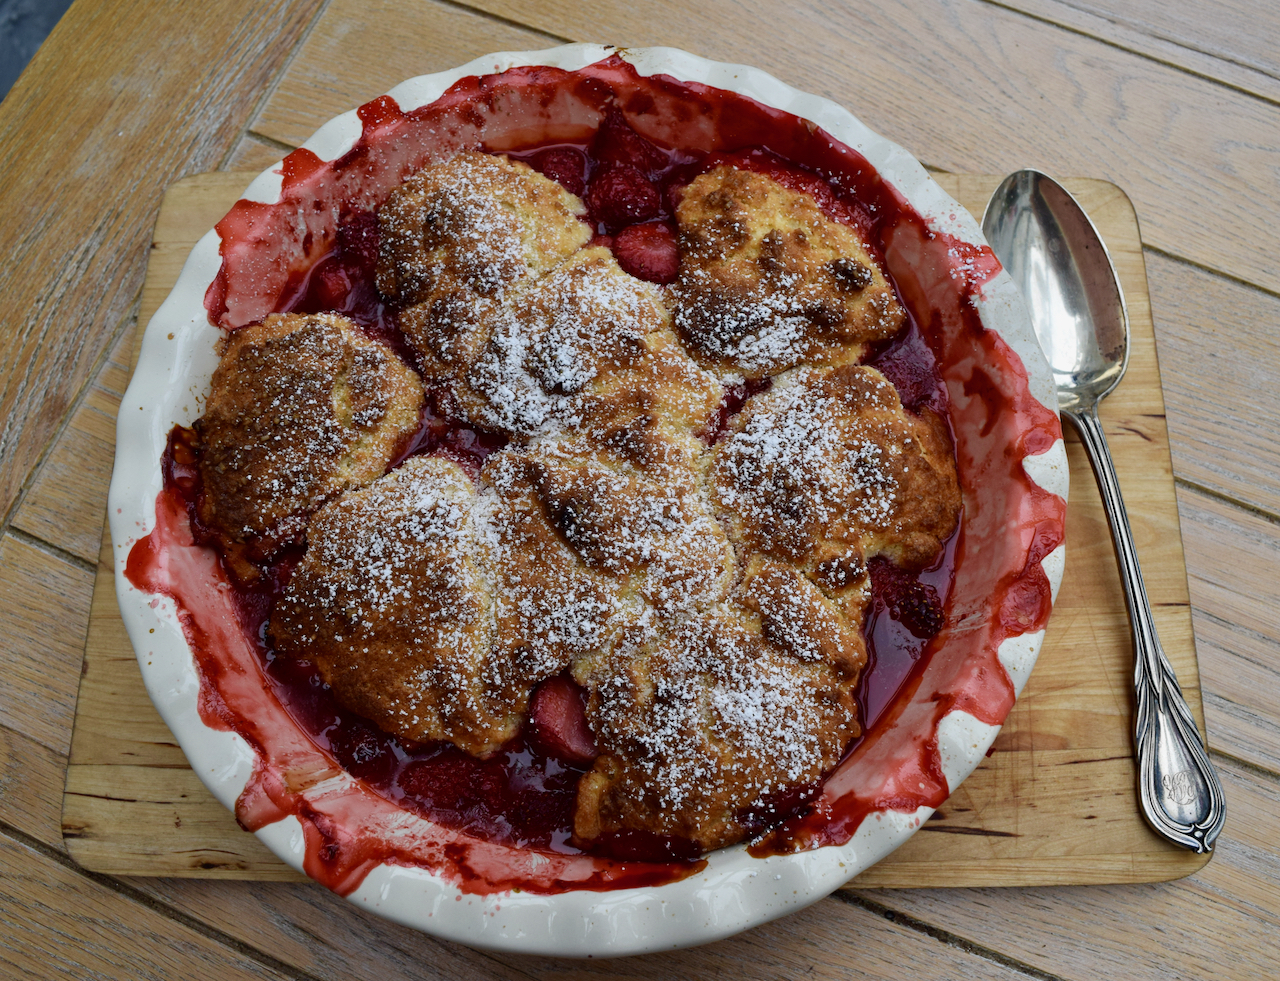 Strawberry and Elderflower Cobbler recipe from Lucy Loves Food Blog